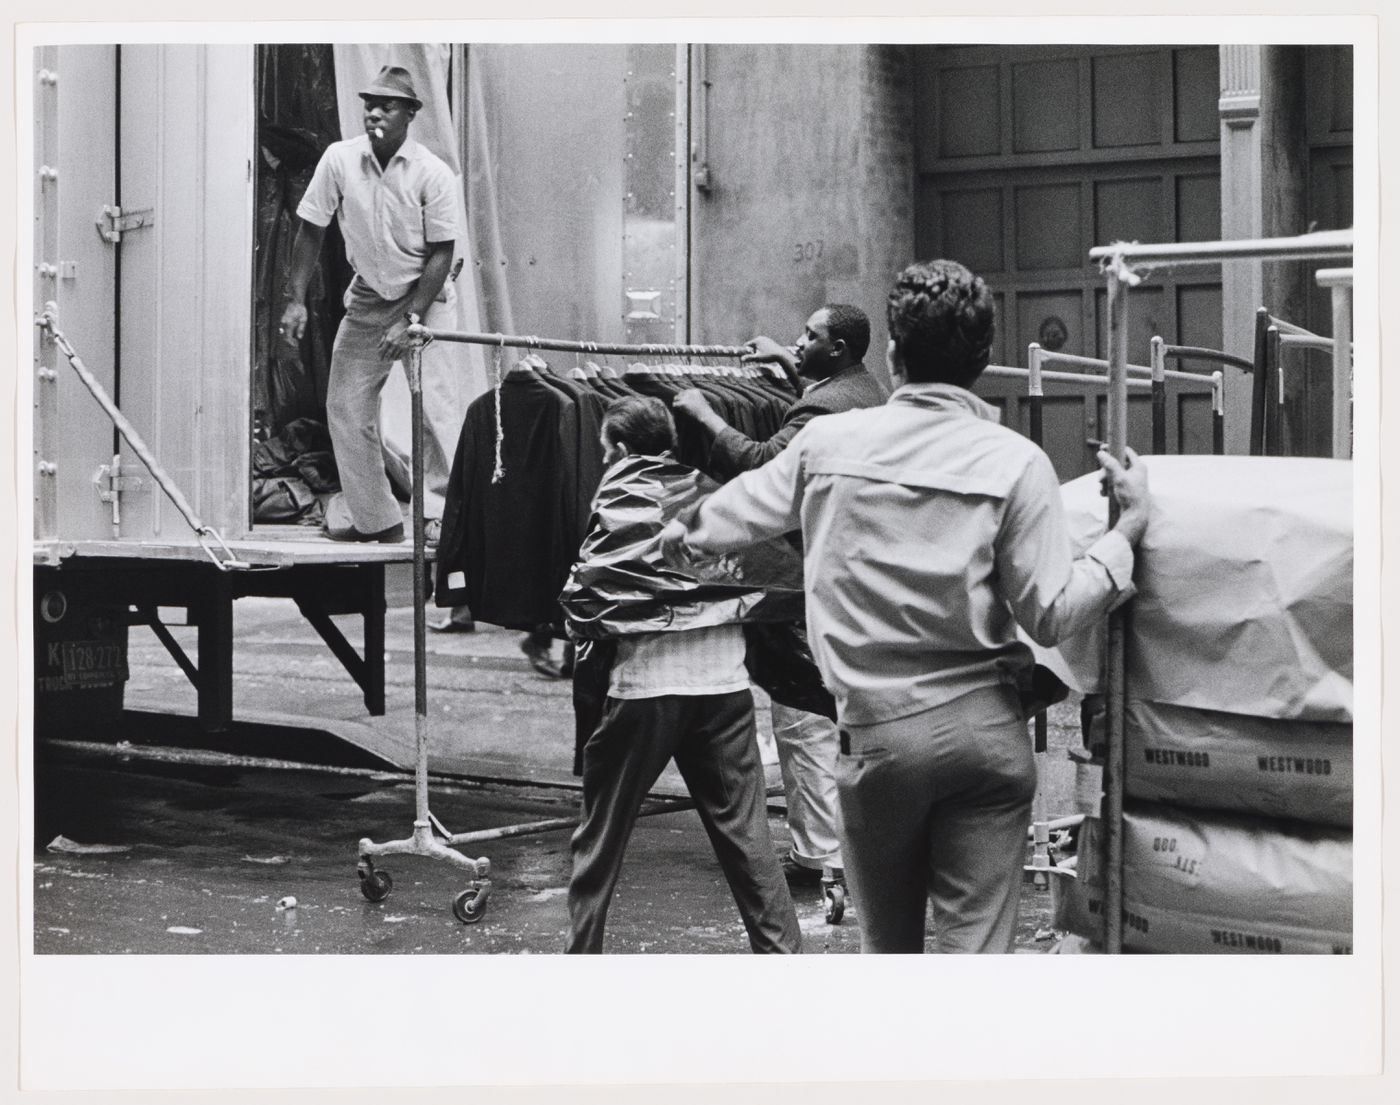 Group portrait of workers using rolling garment racks on the street, West 37th Street, Manhattan, New York City, New York